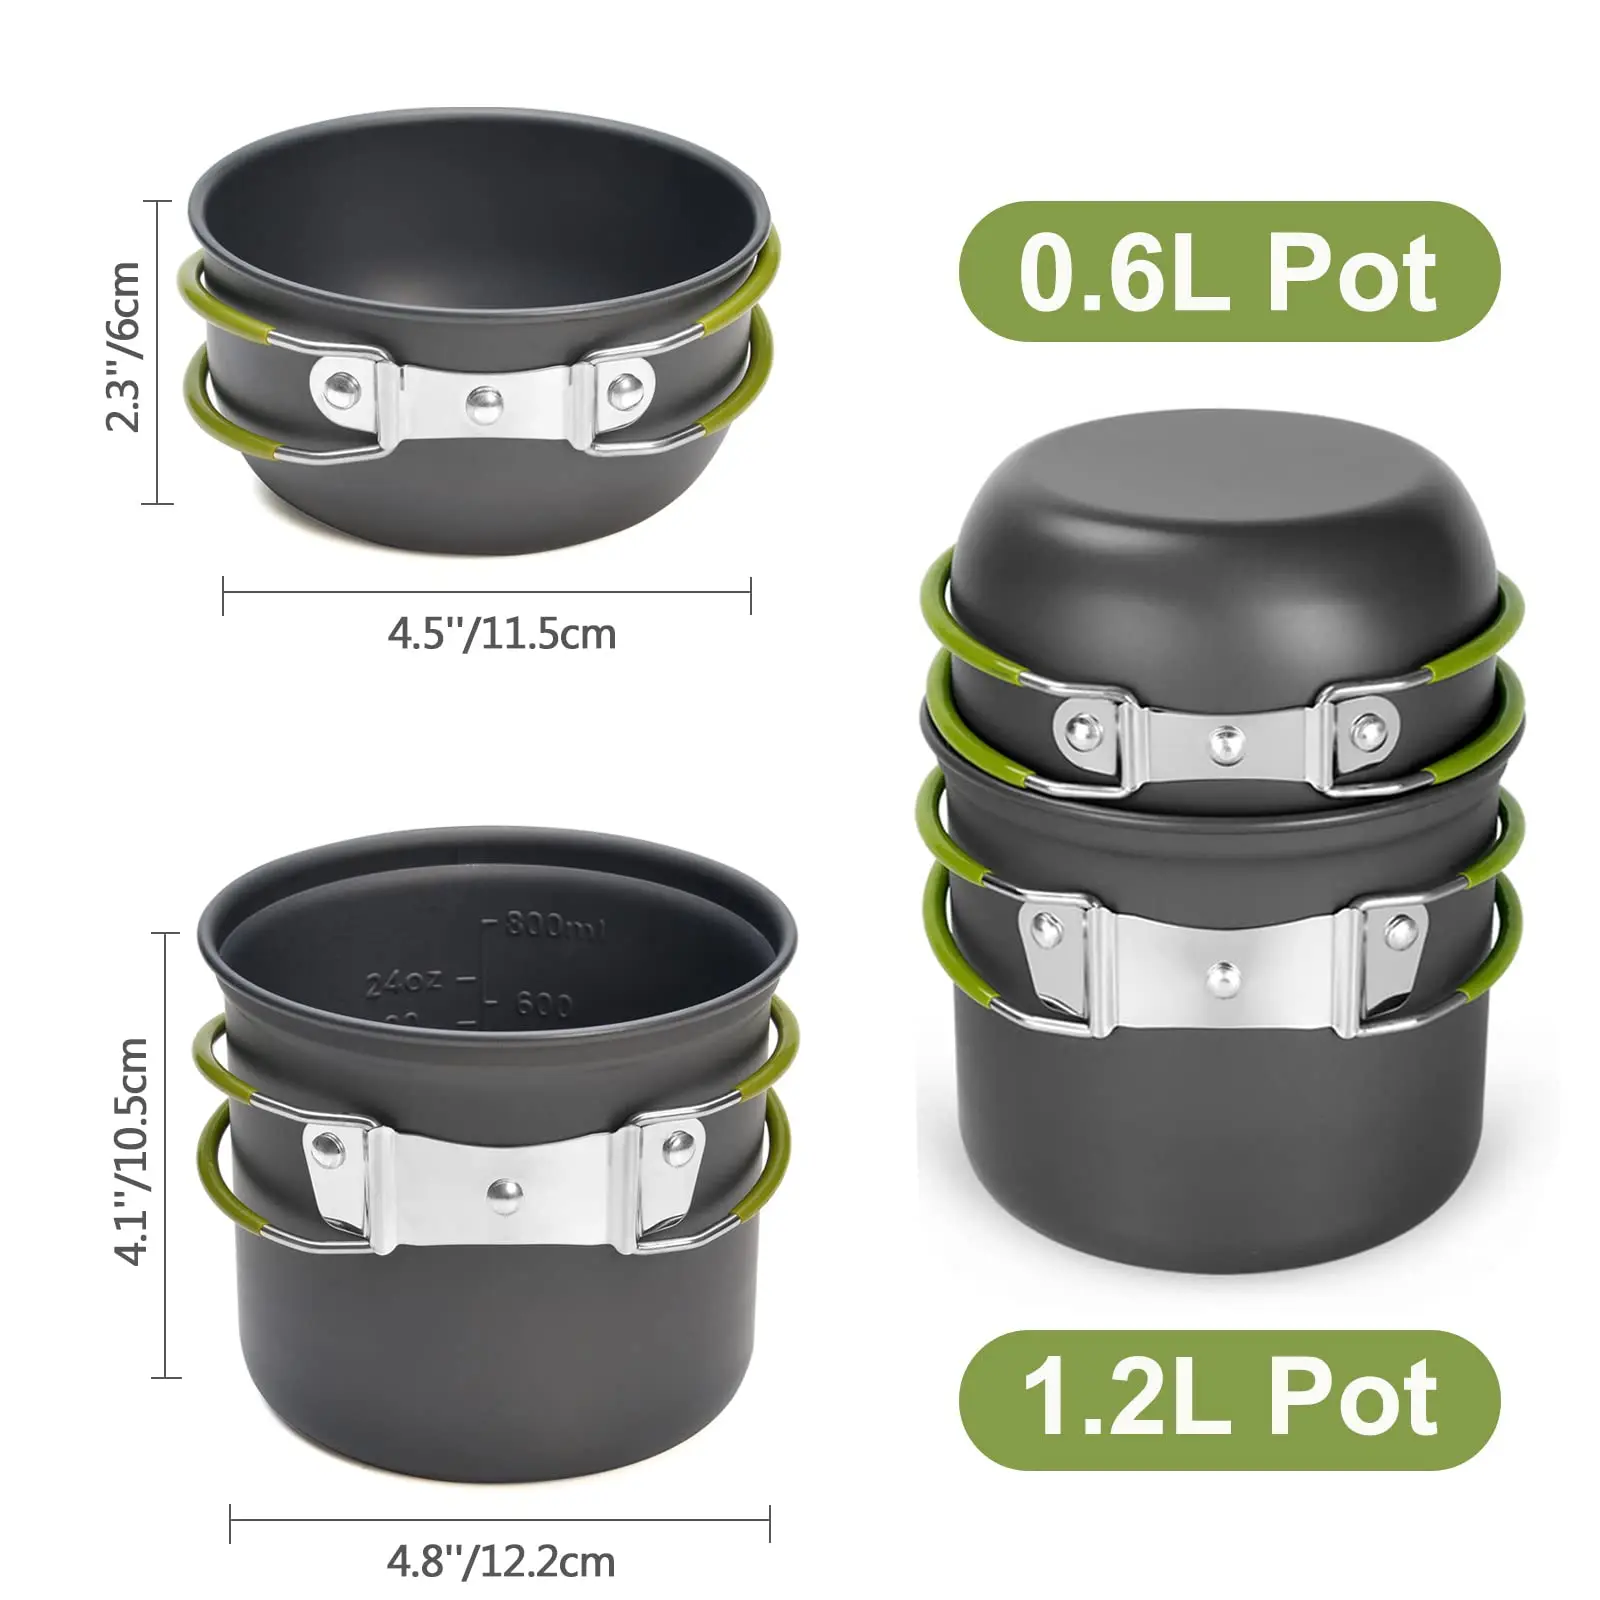 Dropship Outdoor Hiking Picnic Camping Cookware Set Picnic Stove Aluminum Pot  Pans Kit to Sell Online at a Lower Price